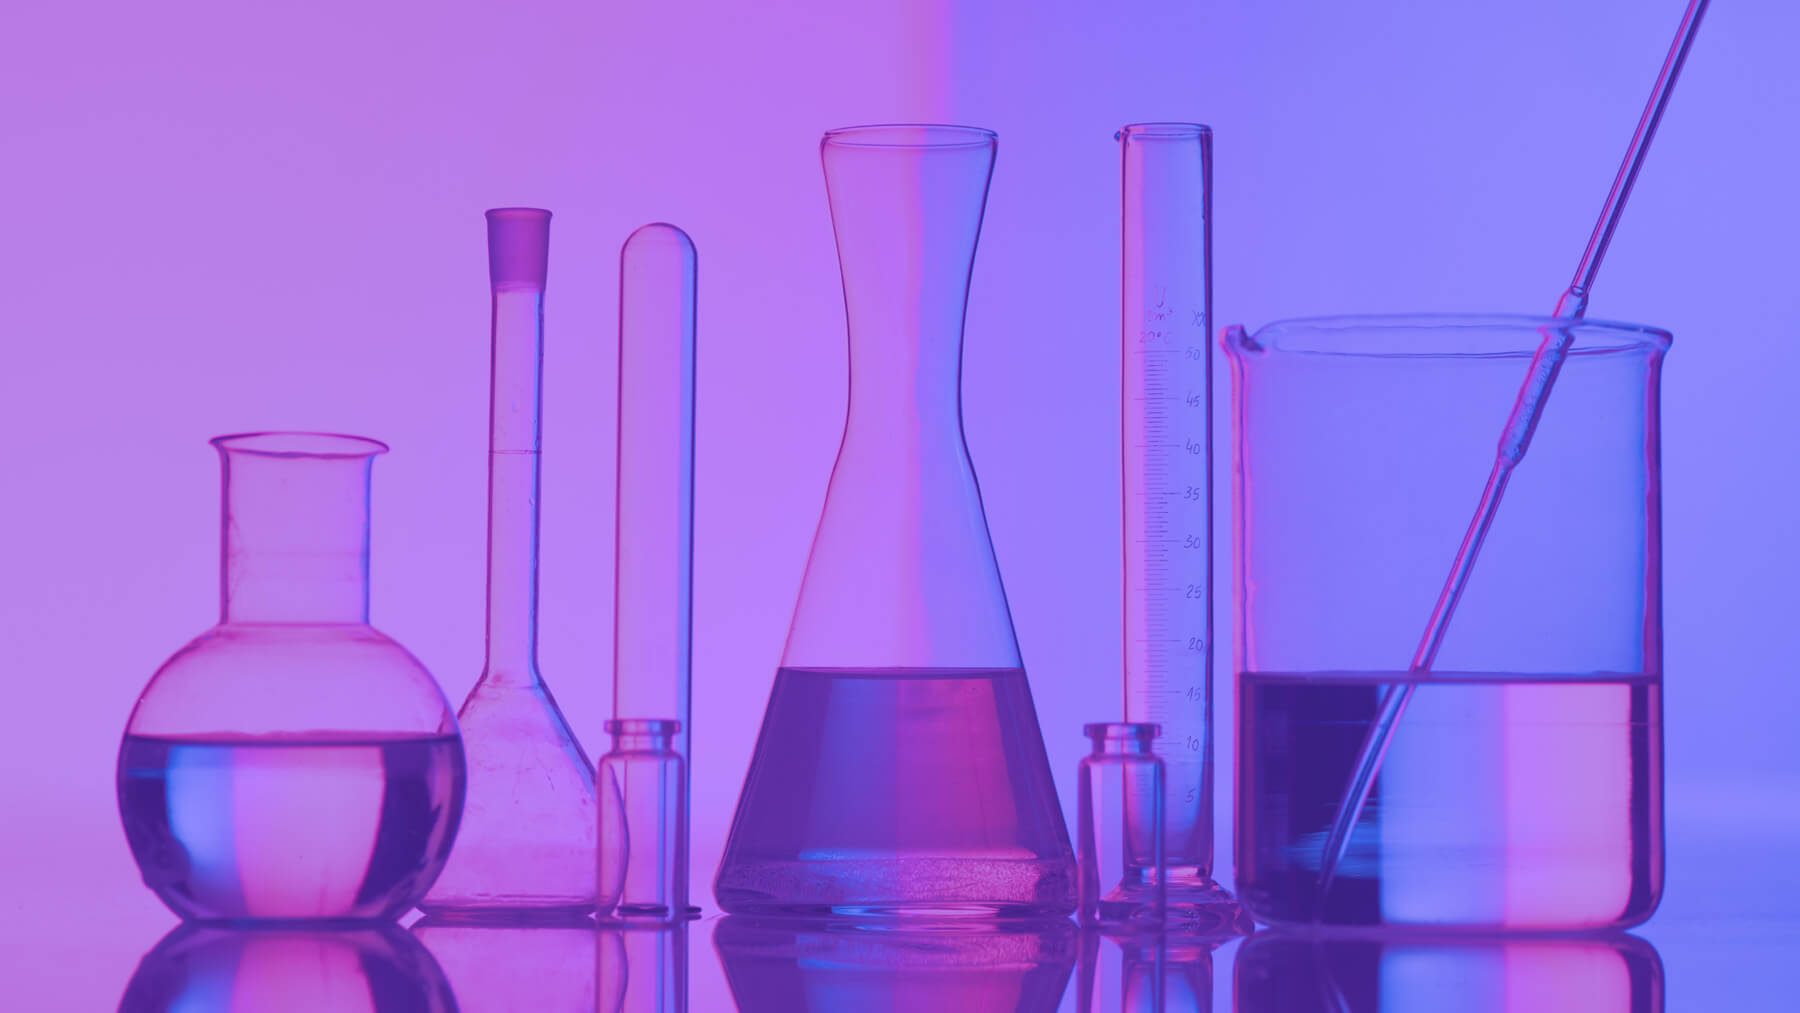 Image of lab beakers and fluid depicting a science environment.